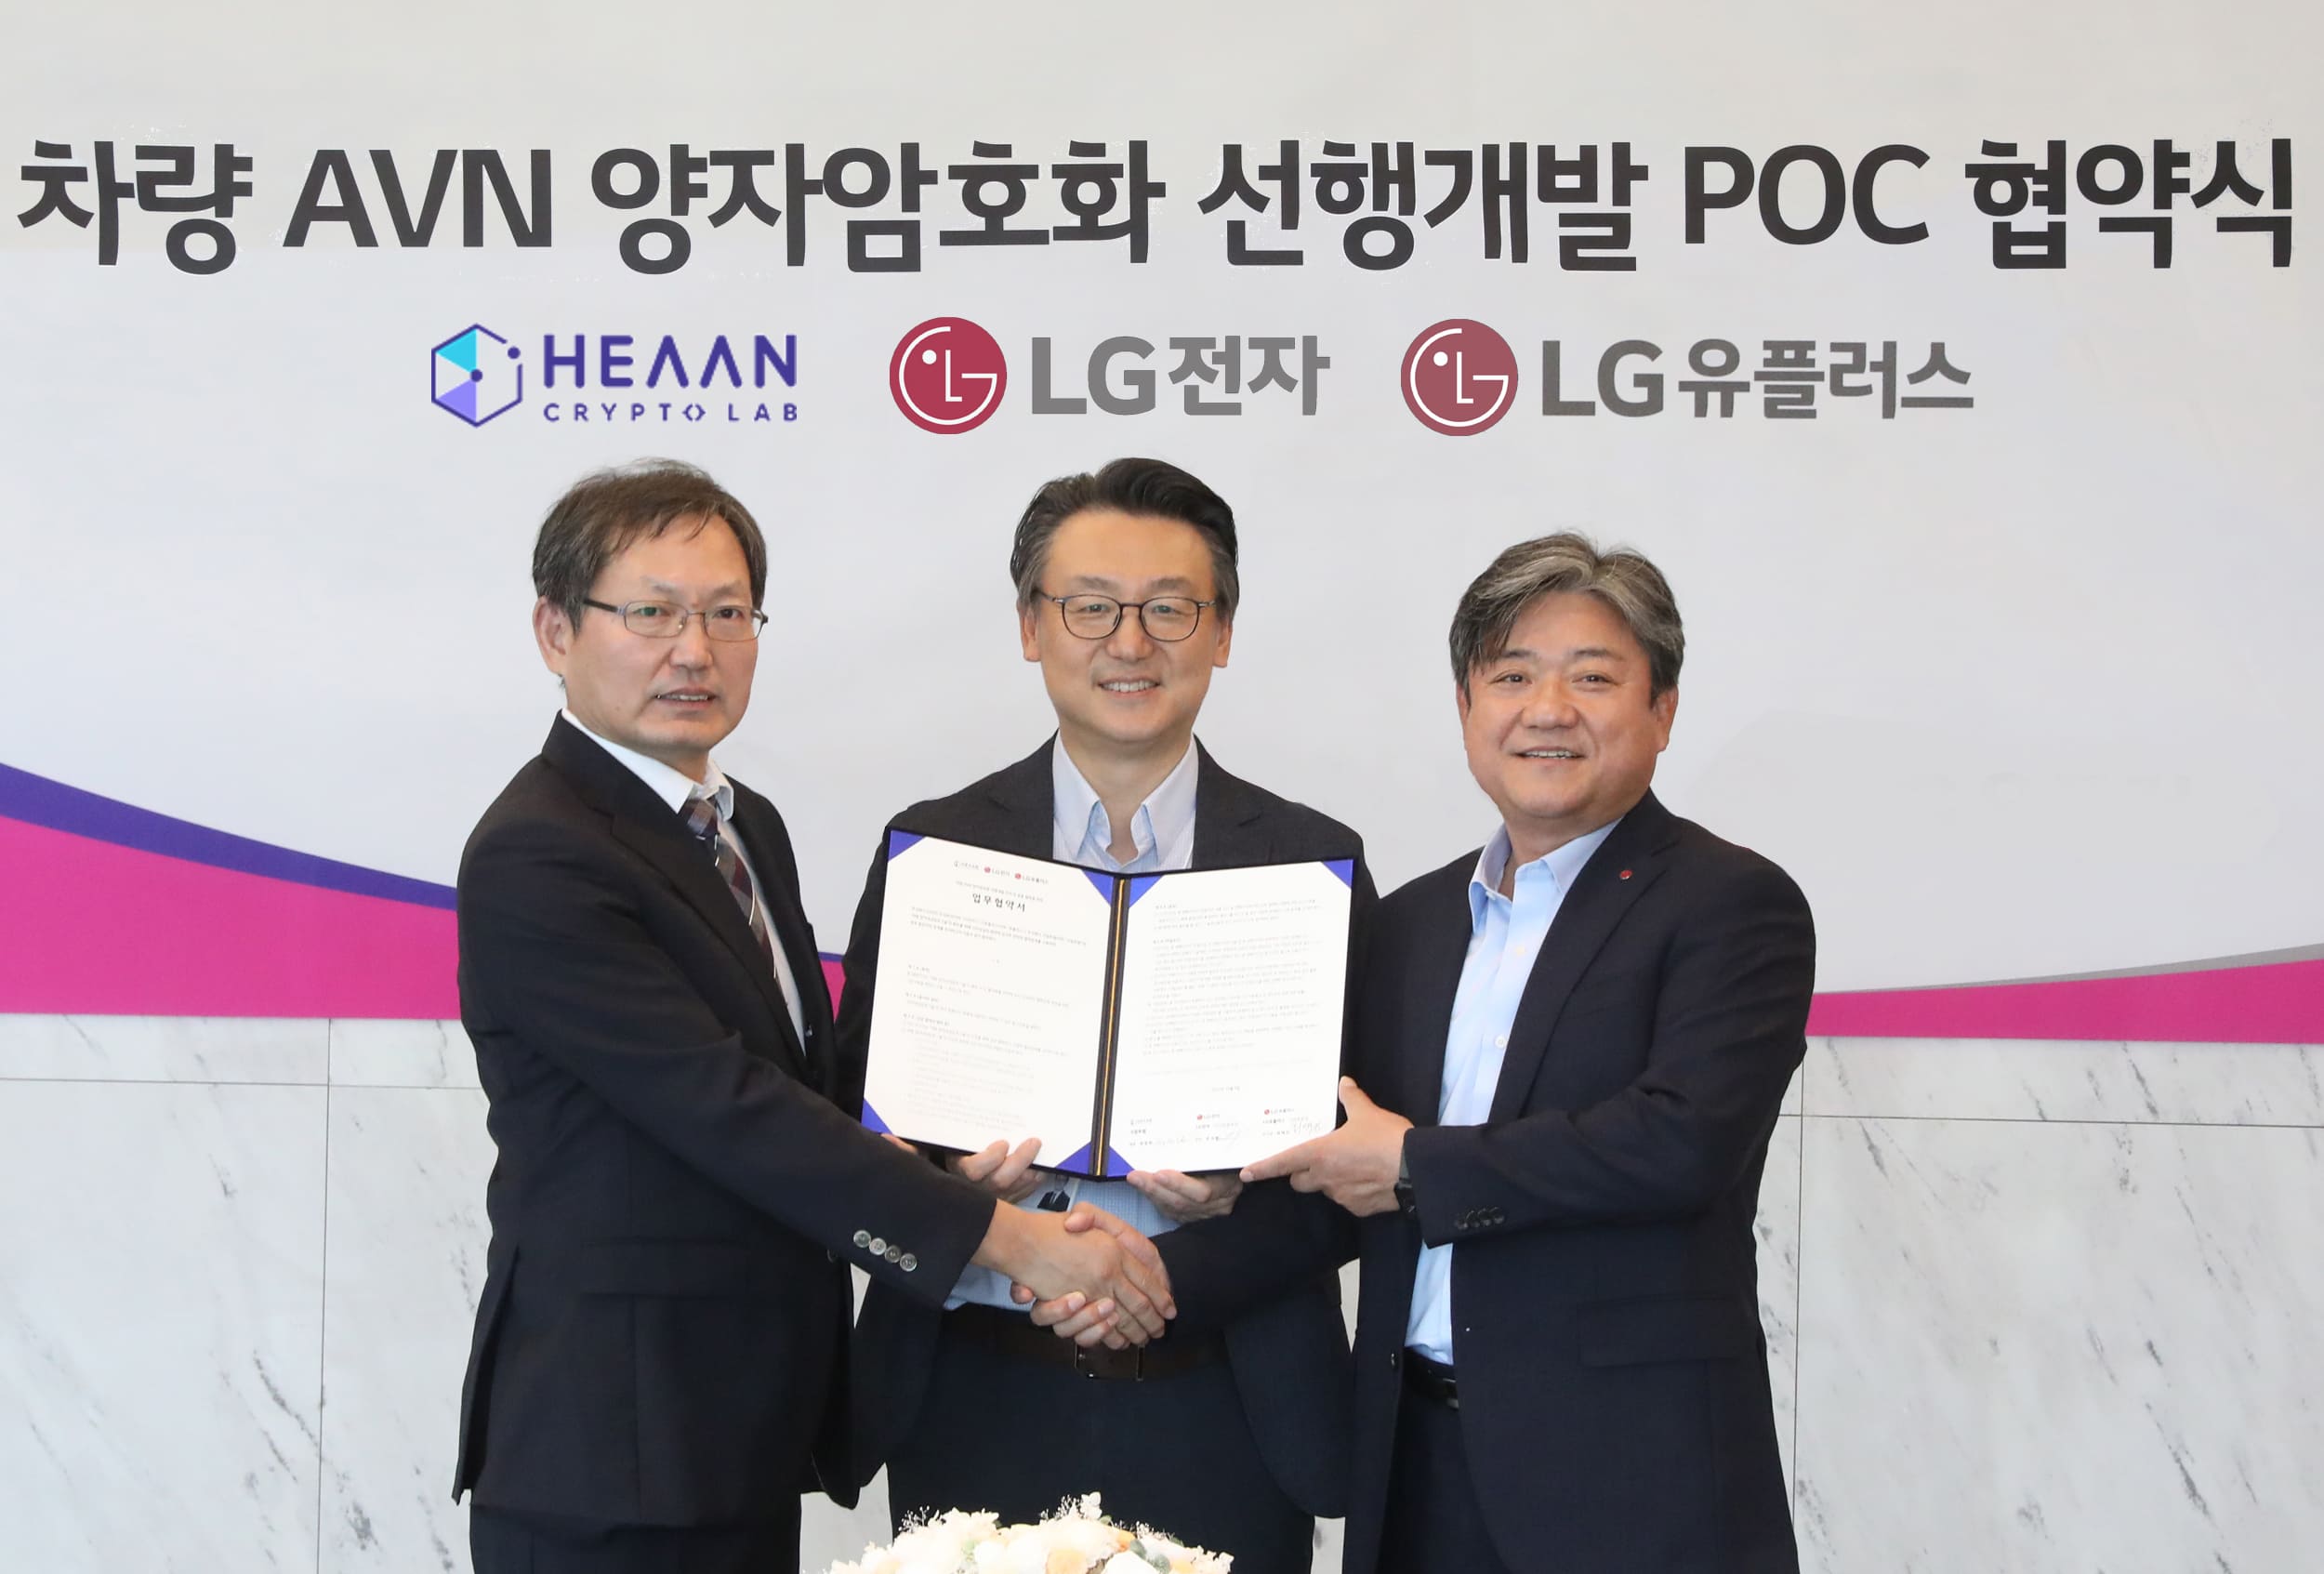 LG signs MOU to Cybersecurity